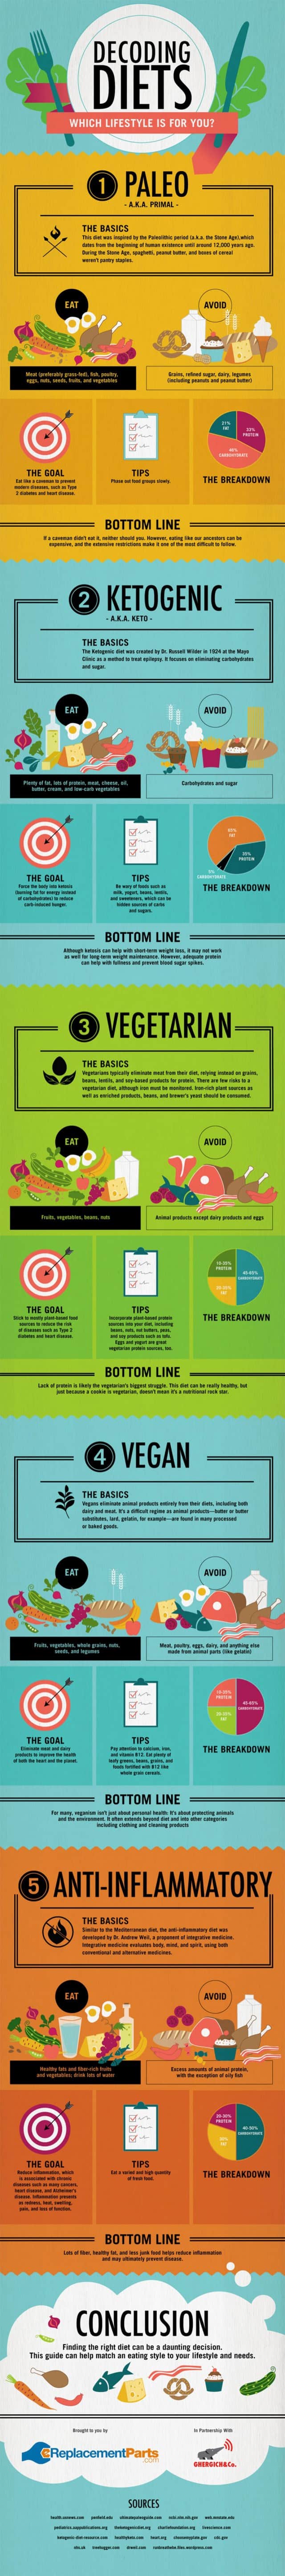 What Diet is Right for You Infographic